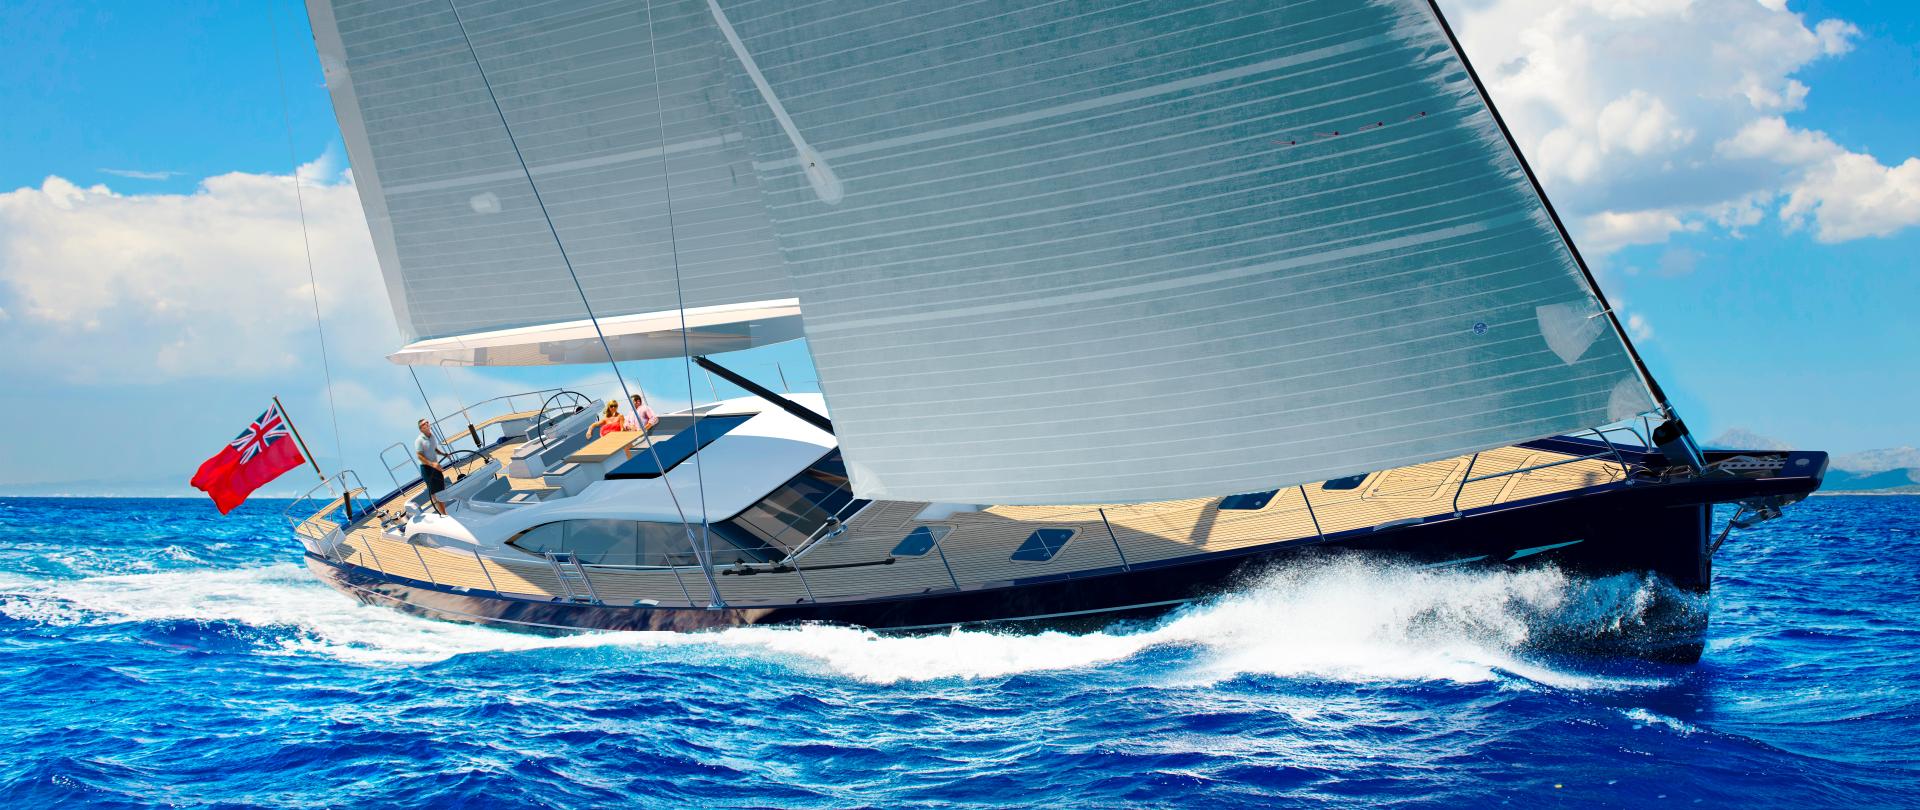 90 Foot Yacht For Sale | Oyster 885 Series II | Oyster Yachts